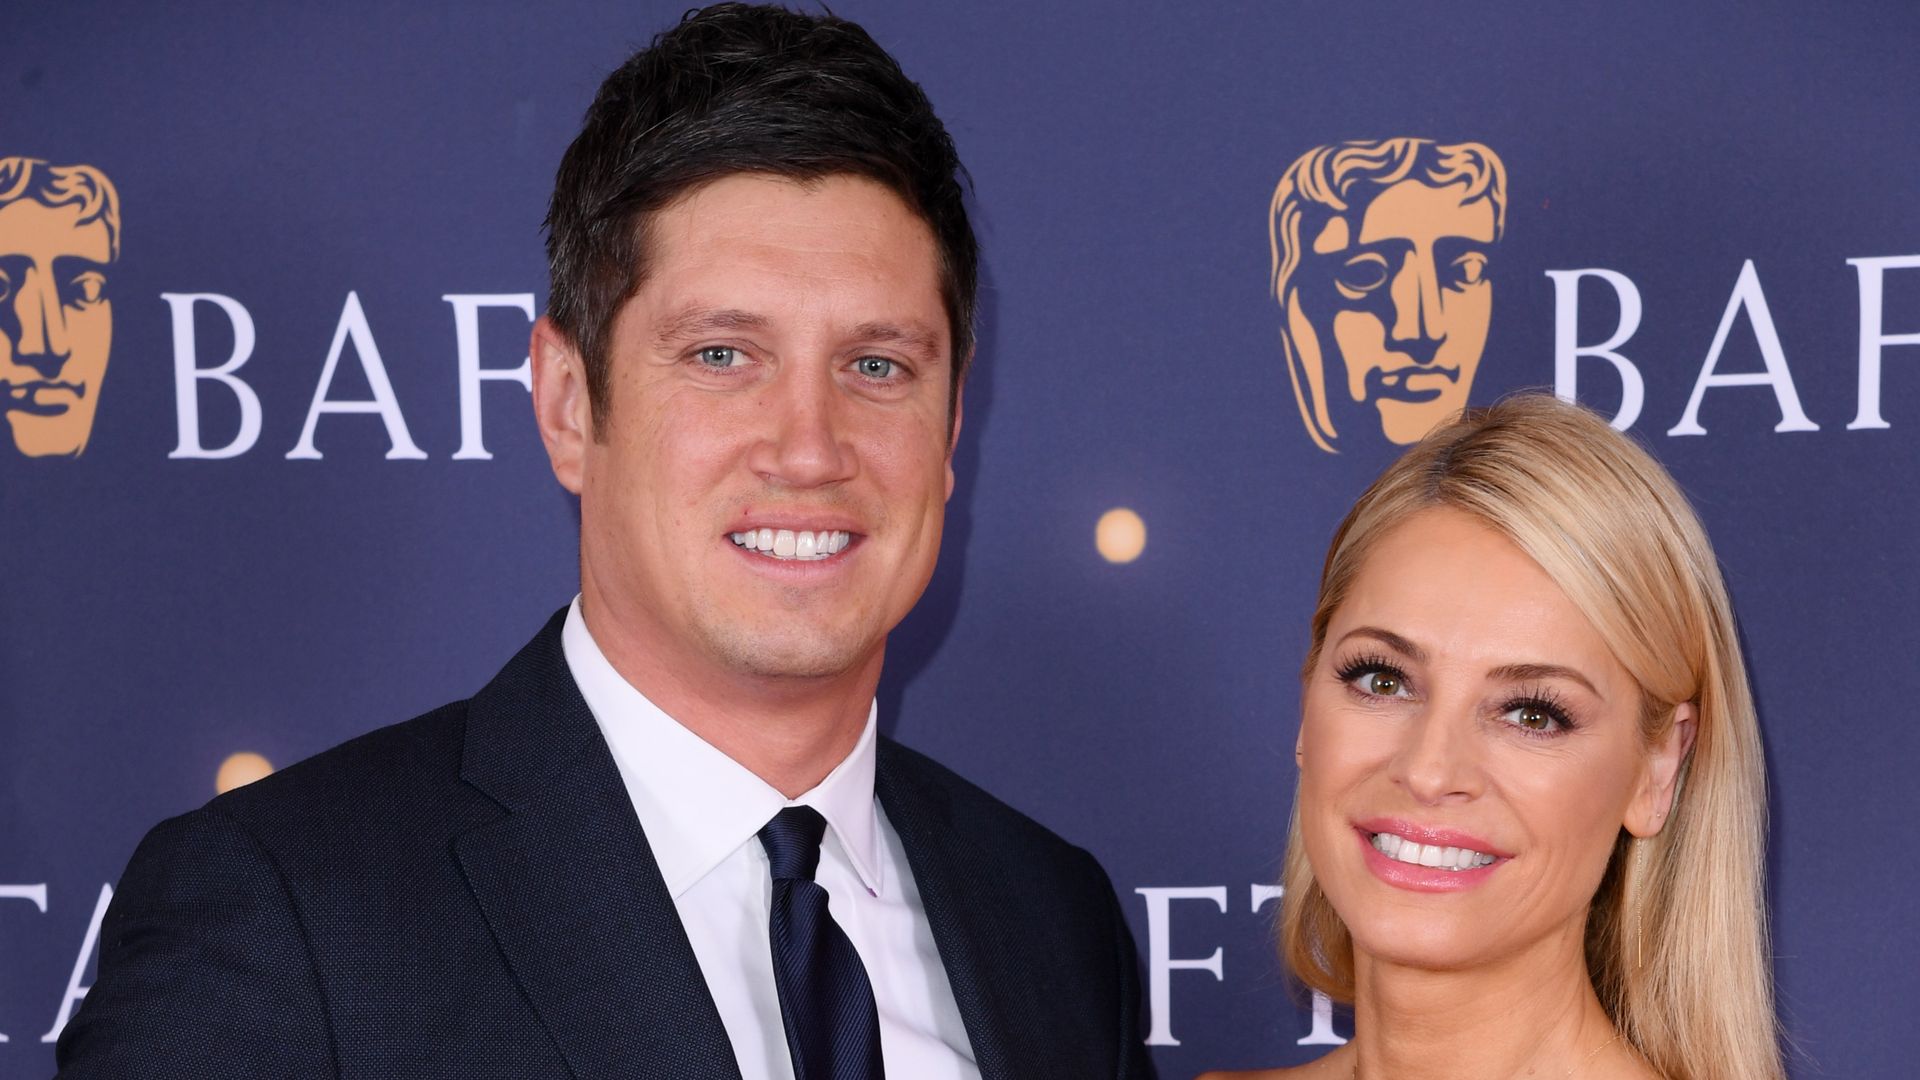 Vernon Kay in suit standing with Tess Daly in red dress